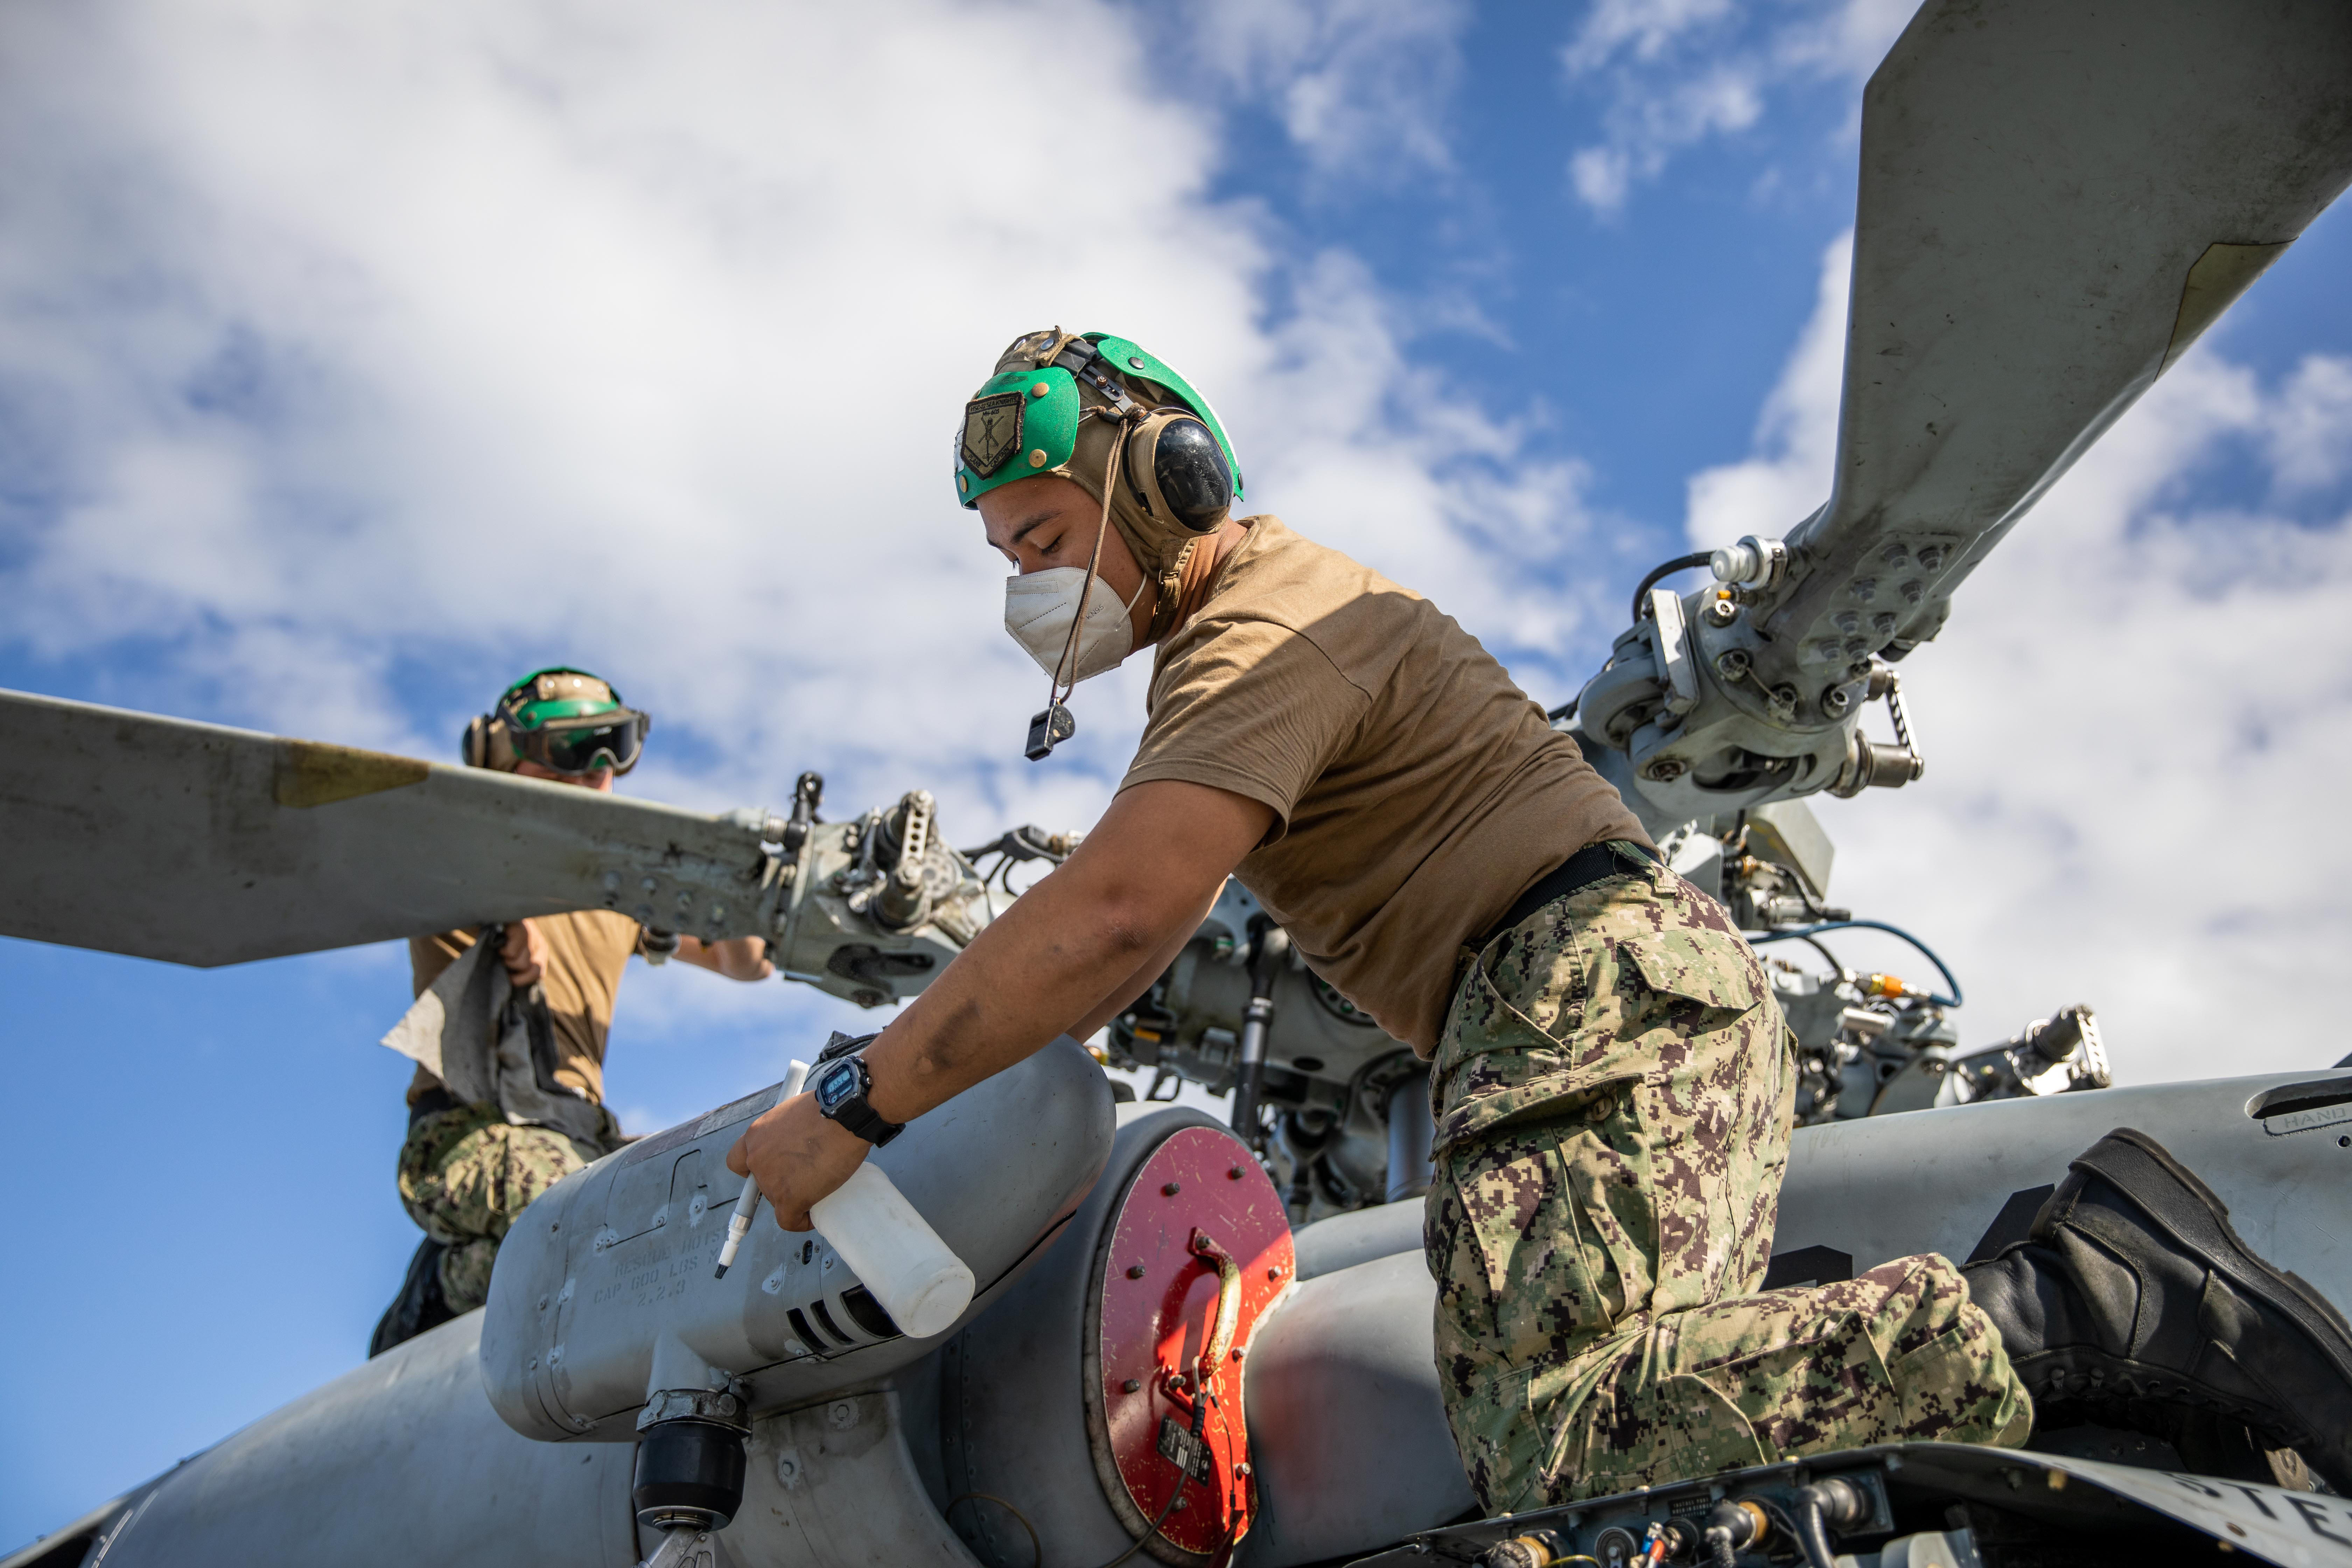 Aviation Machinist’s Mate Airman Felix Ricoospina and Aviation Machinist’s Mate 3rd Class Daimein Day, assigned to the “Sea Knights” of Helicopter Sea Combat Squadron (HSC) 22, Detachment 5, clean the blades of an MH-60S Sea Hawk helicopter on the flight deck of the Freedom-variant littoral combat ship USS Milwaukee (LCS 5).